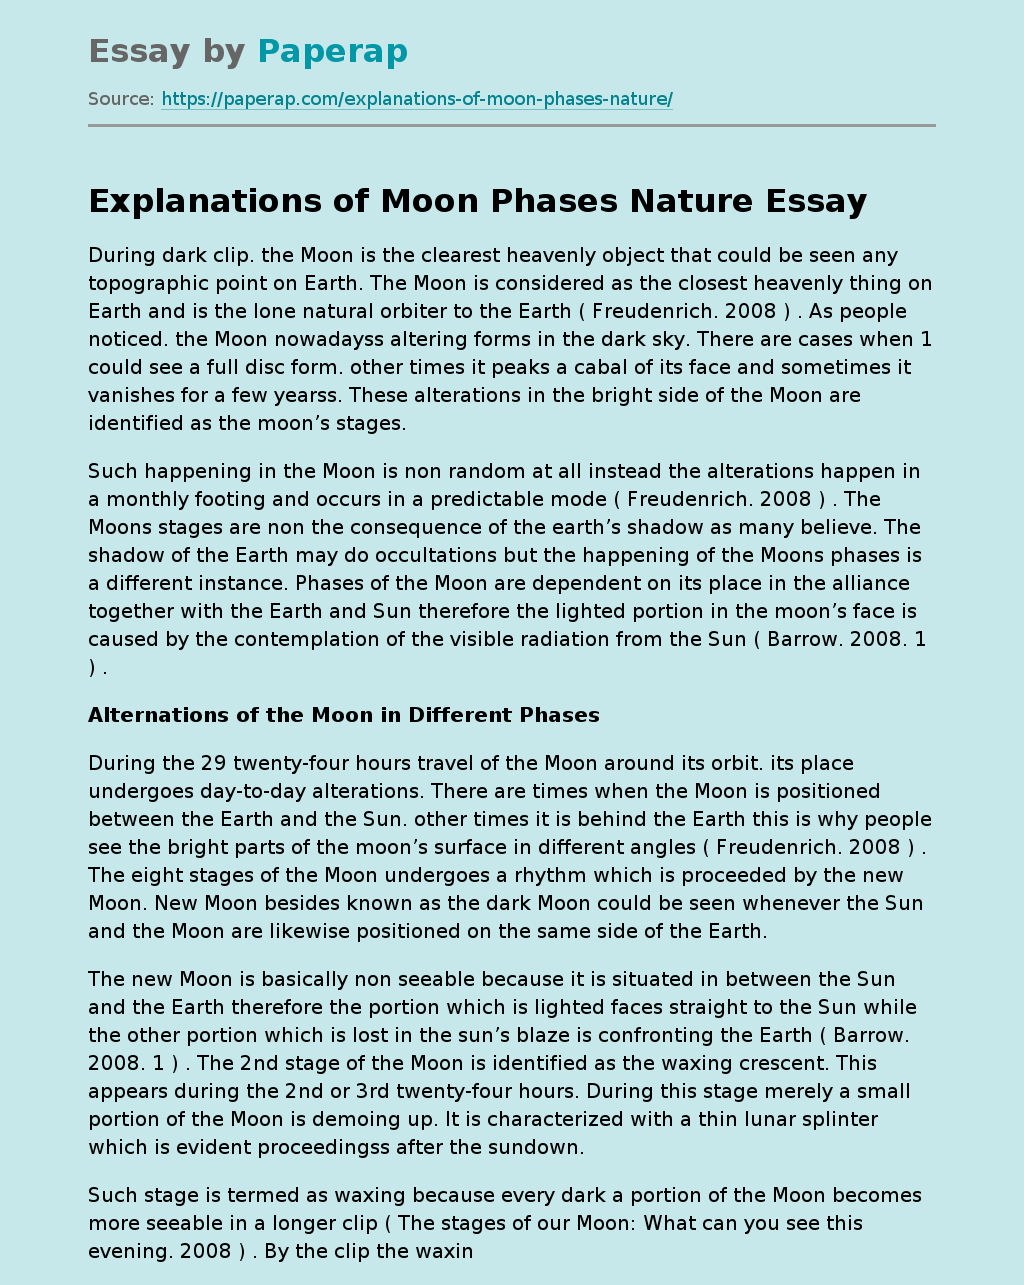 Explanations of Moon Phases Nature